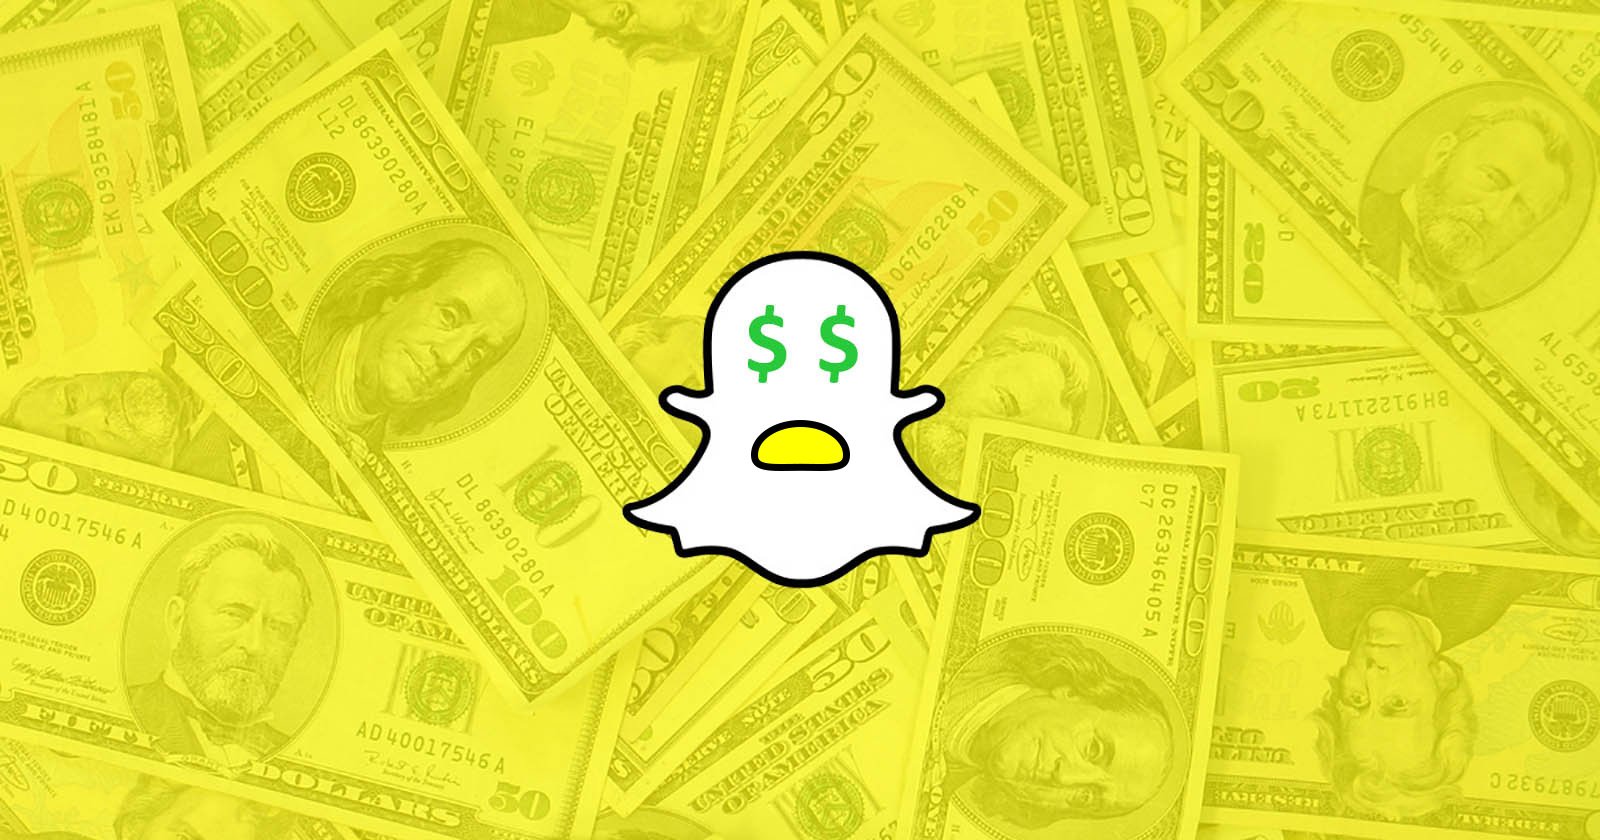 Snap Stock Crashes Over 20% as Net Losses Widen to $2.2 Billion